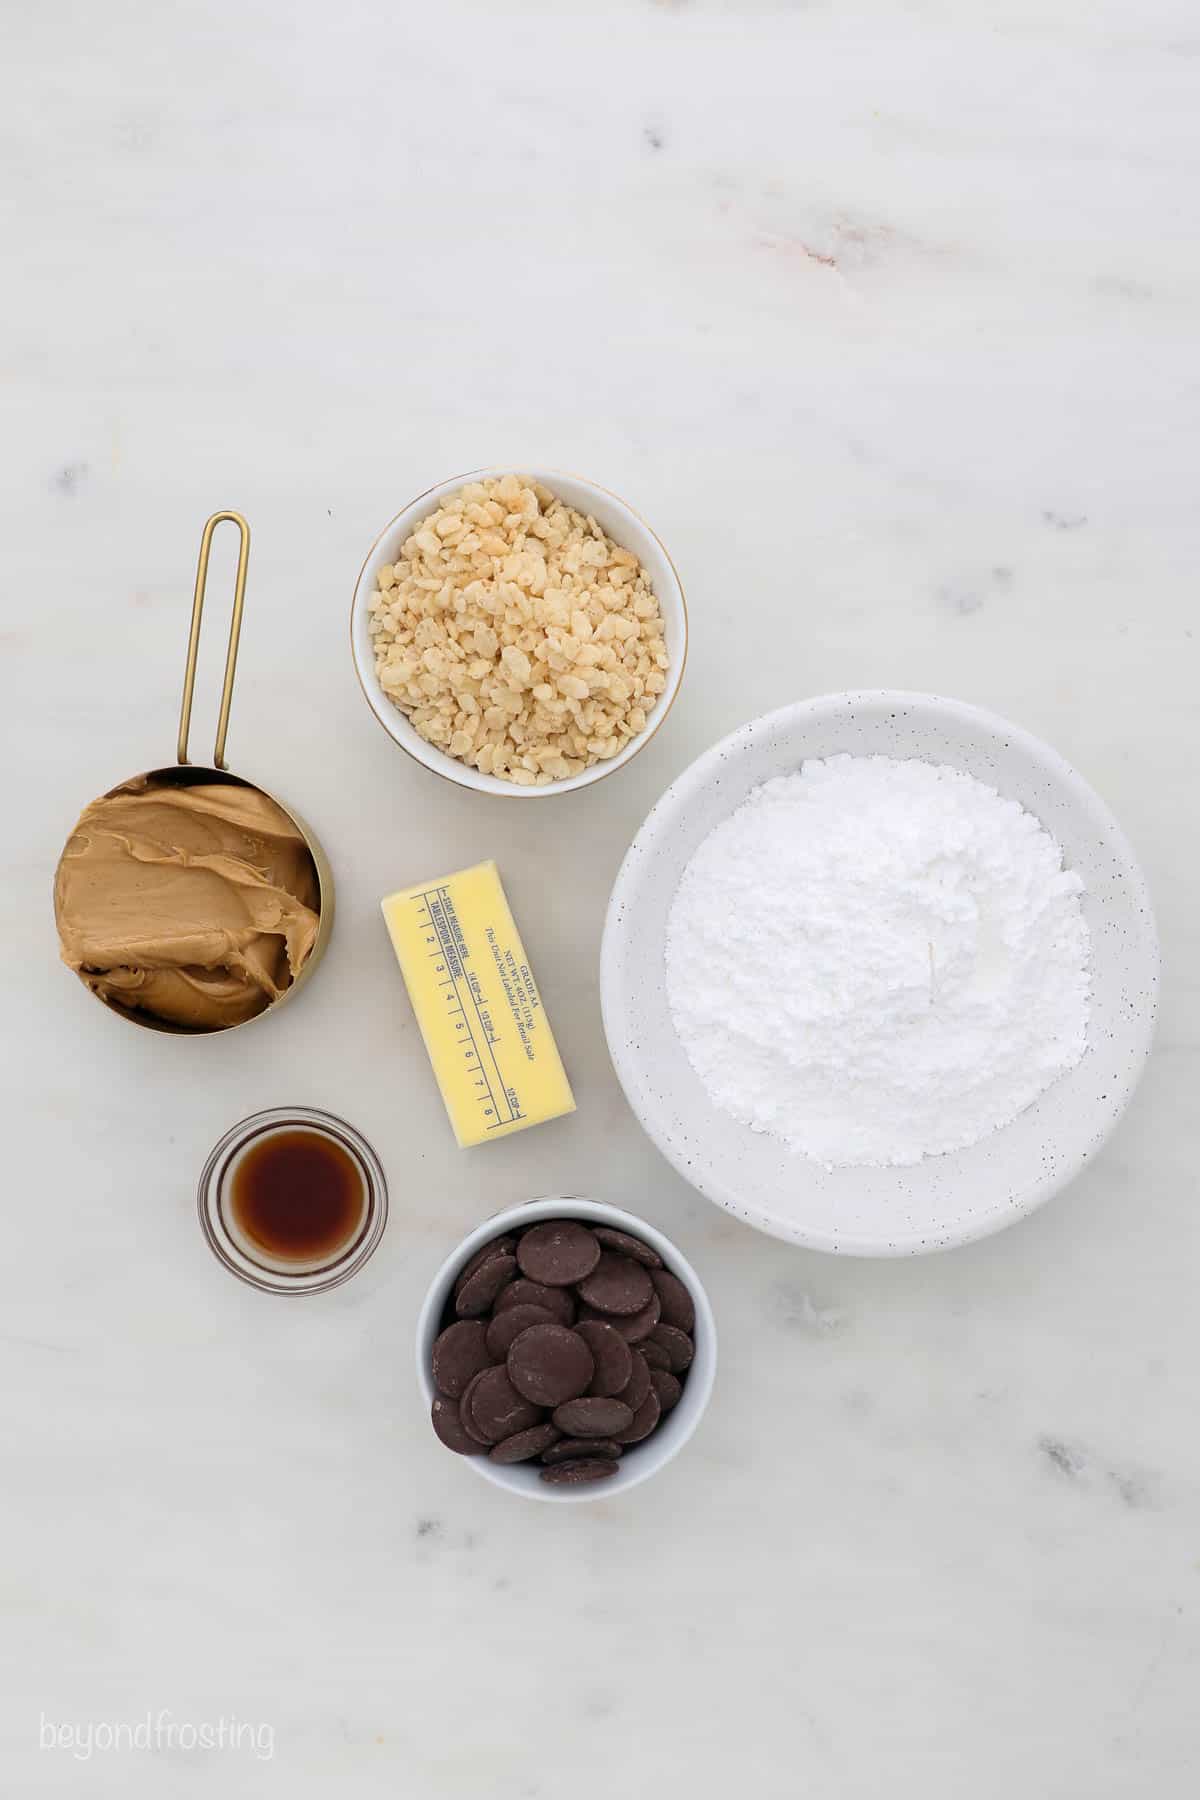 A bowl of powdered sugar, a stick of unsalted butter and the remaining truffle ingredients arranged on a countertop